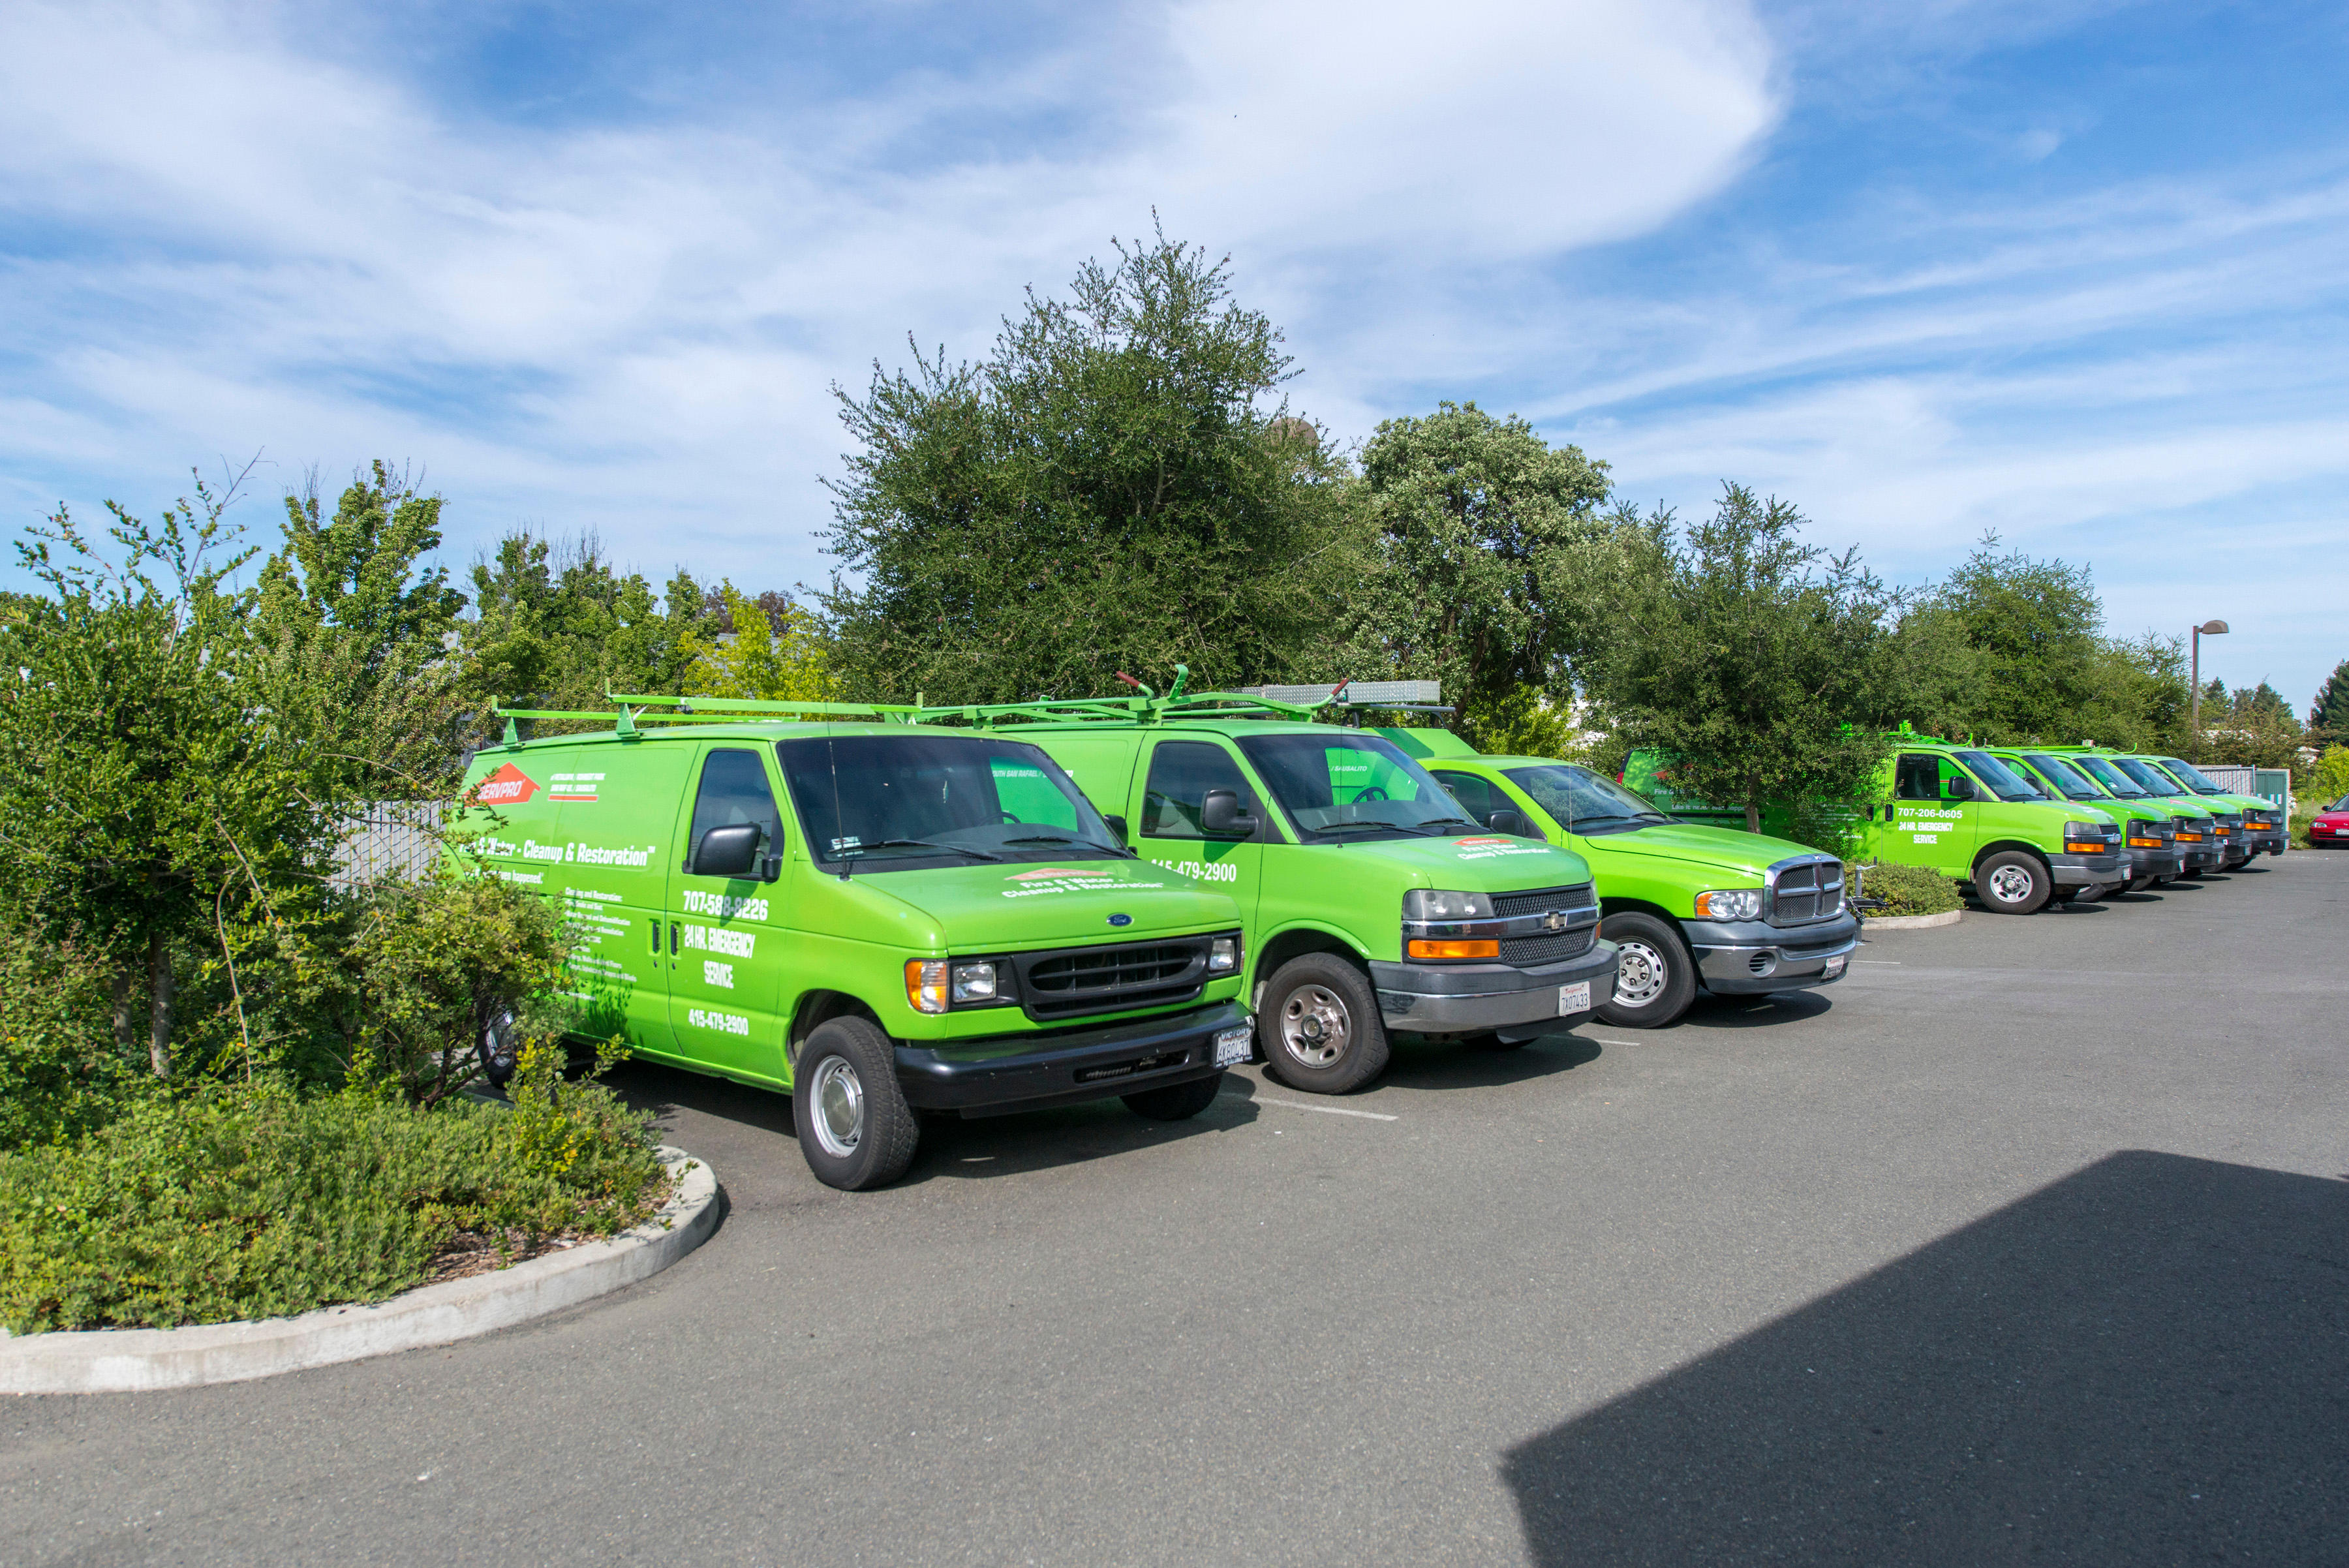 SERVPRO of Lafayette/Moraga/Orinda vans, which provide water, fire, and smoke damage restoration services.